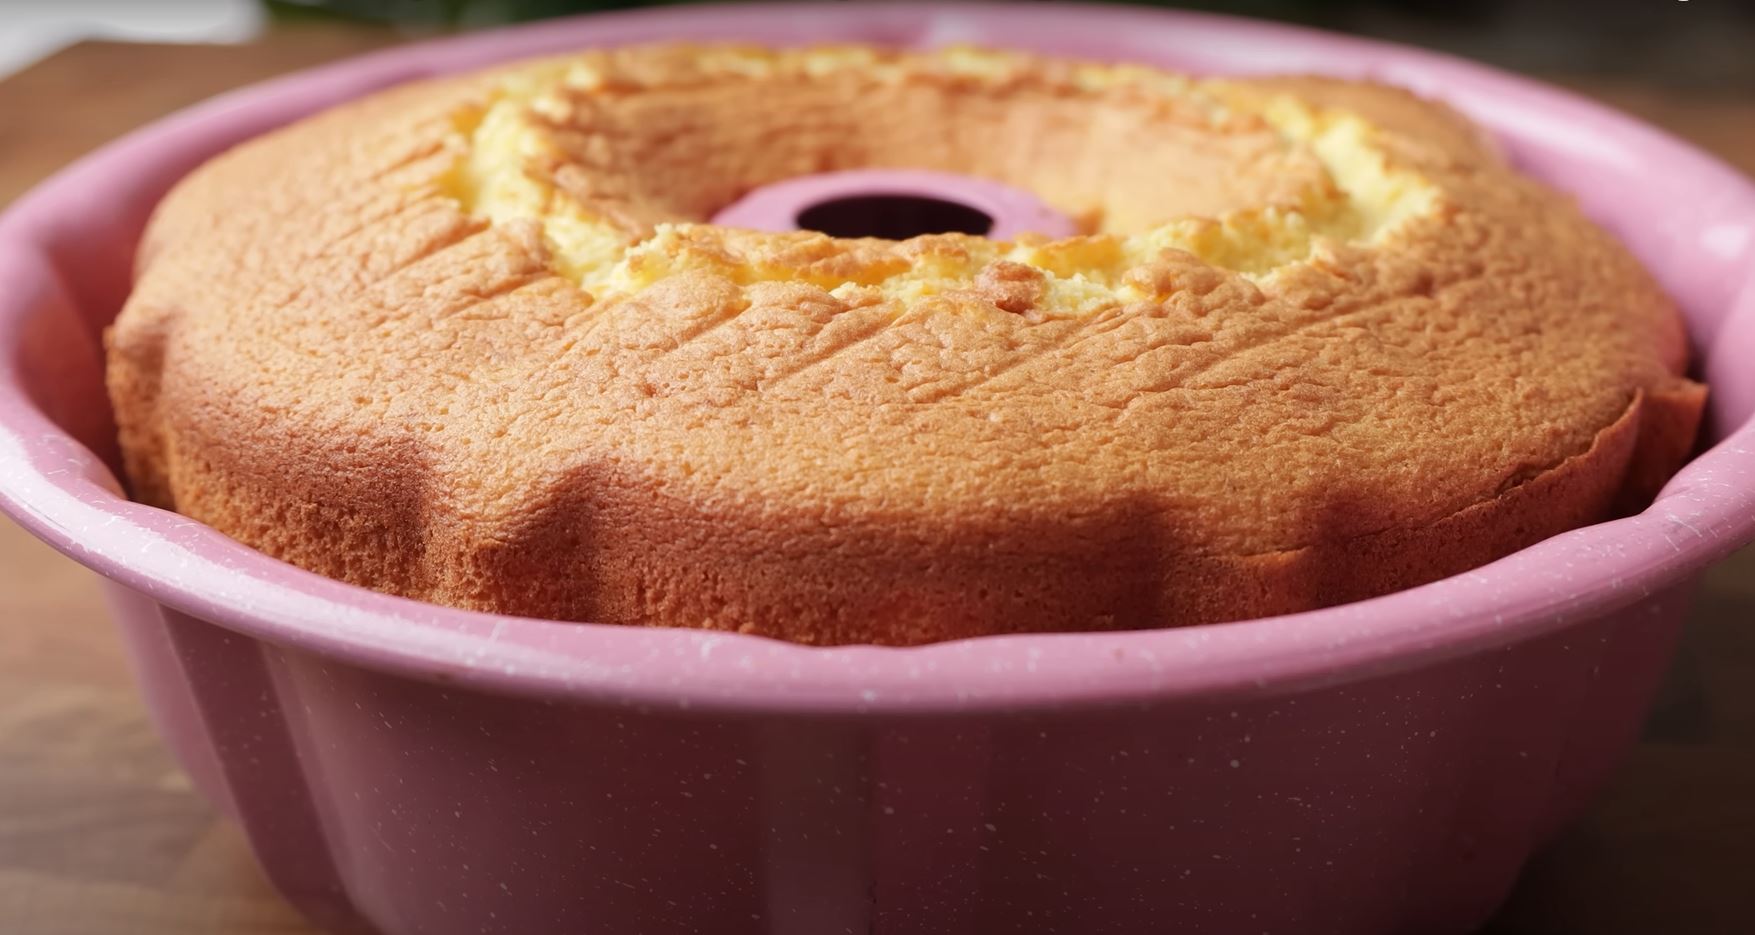 The Right Way to Make An Orange Cake